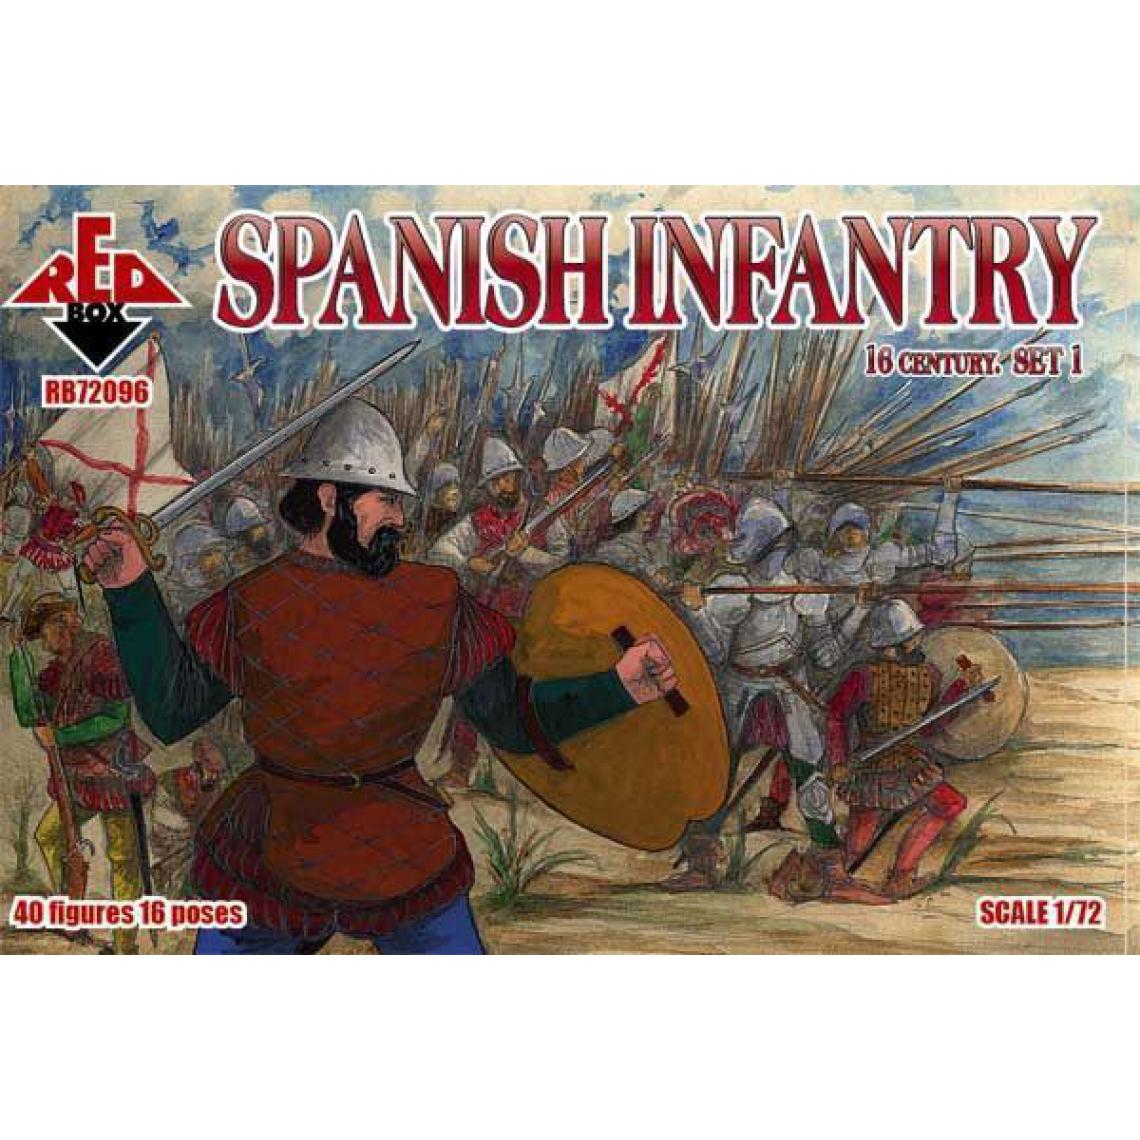 Red Box - Spanish infantry, 16th century, set 1 - 1:72e - Red Box - Voitures RC